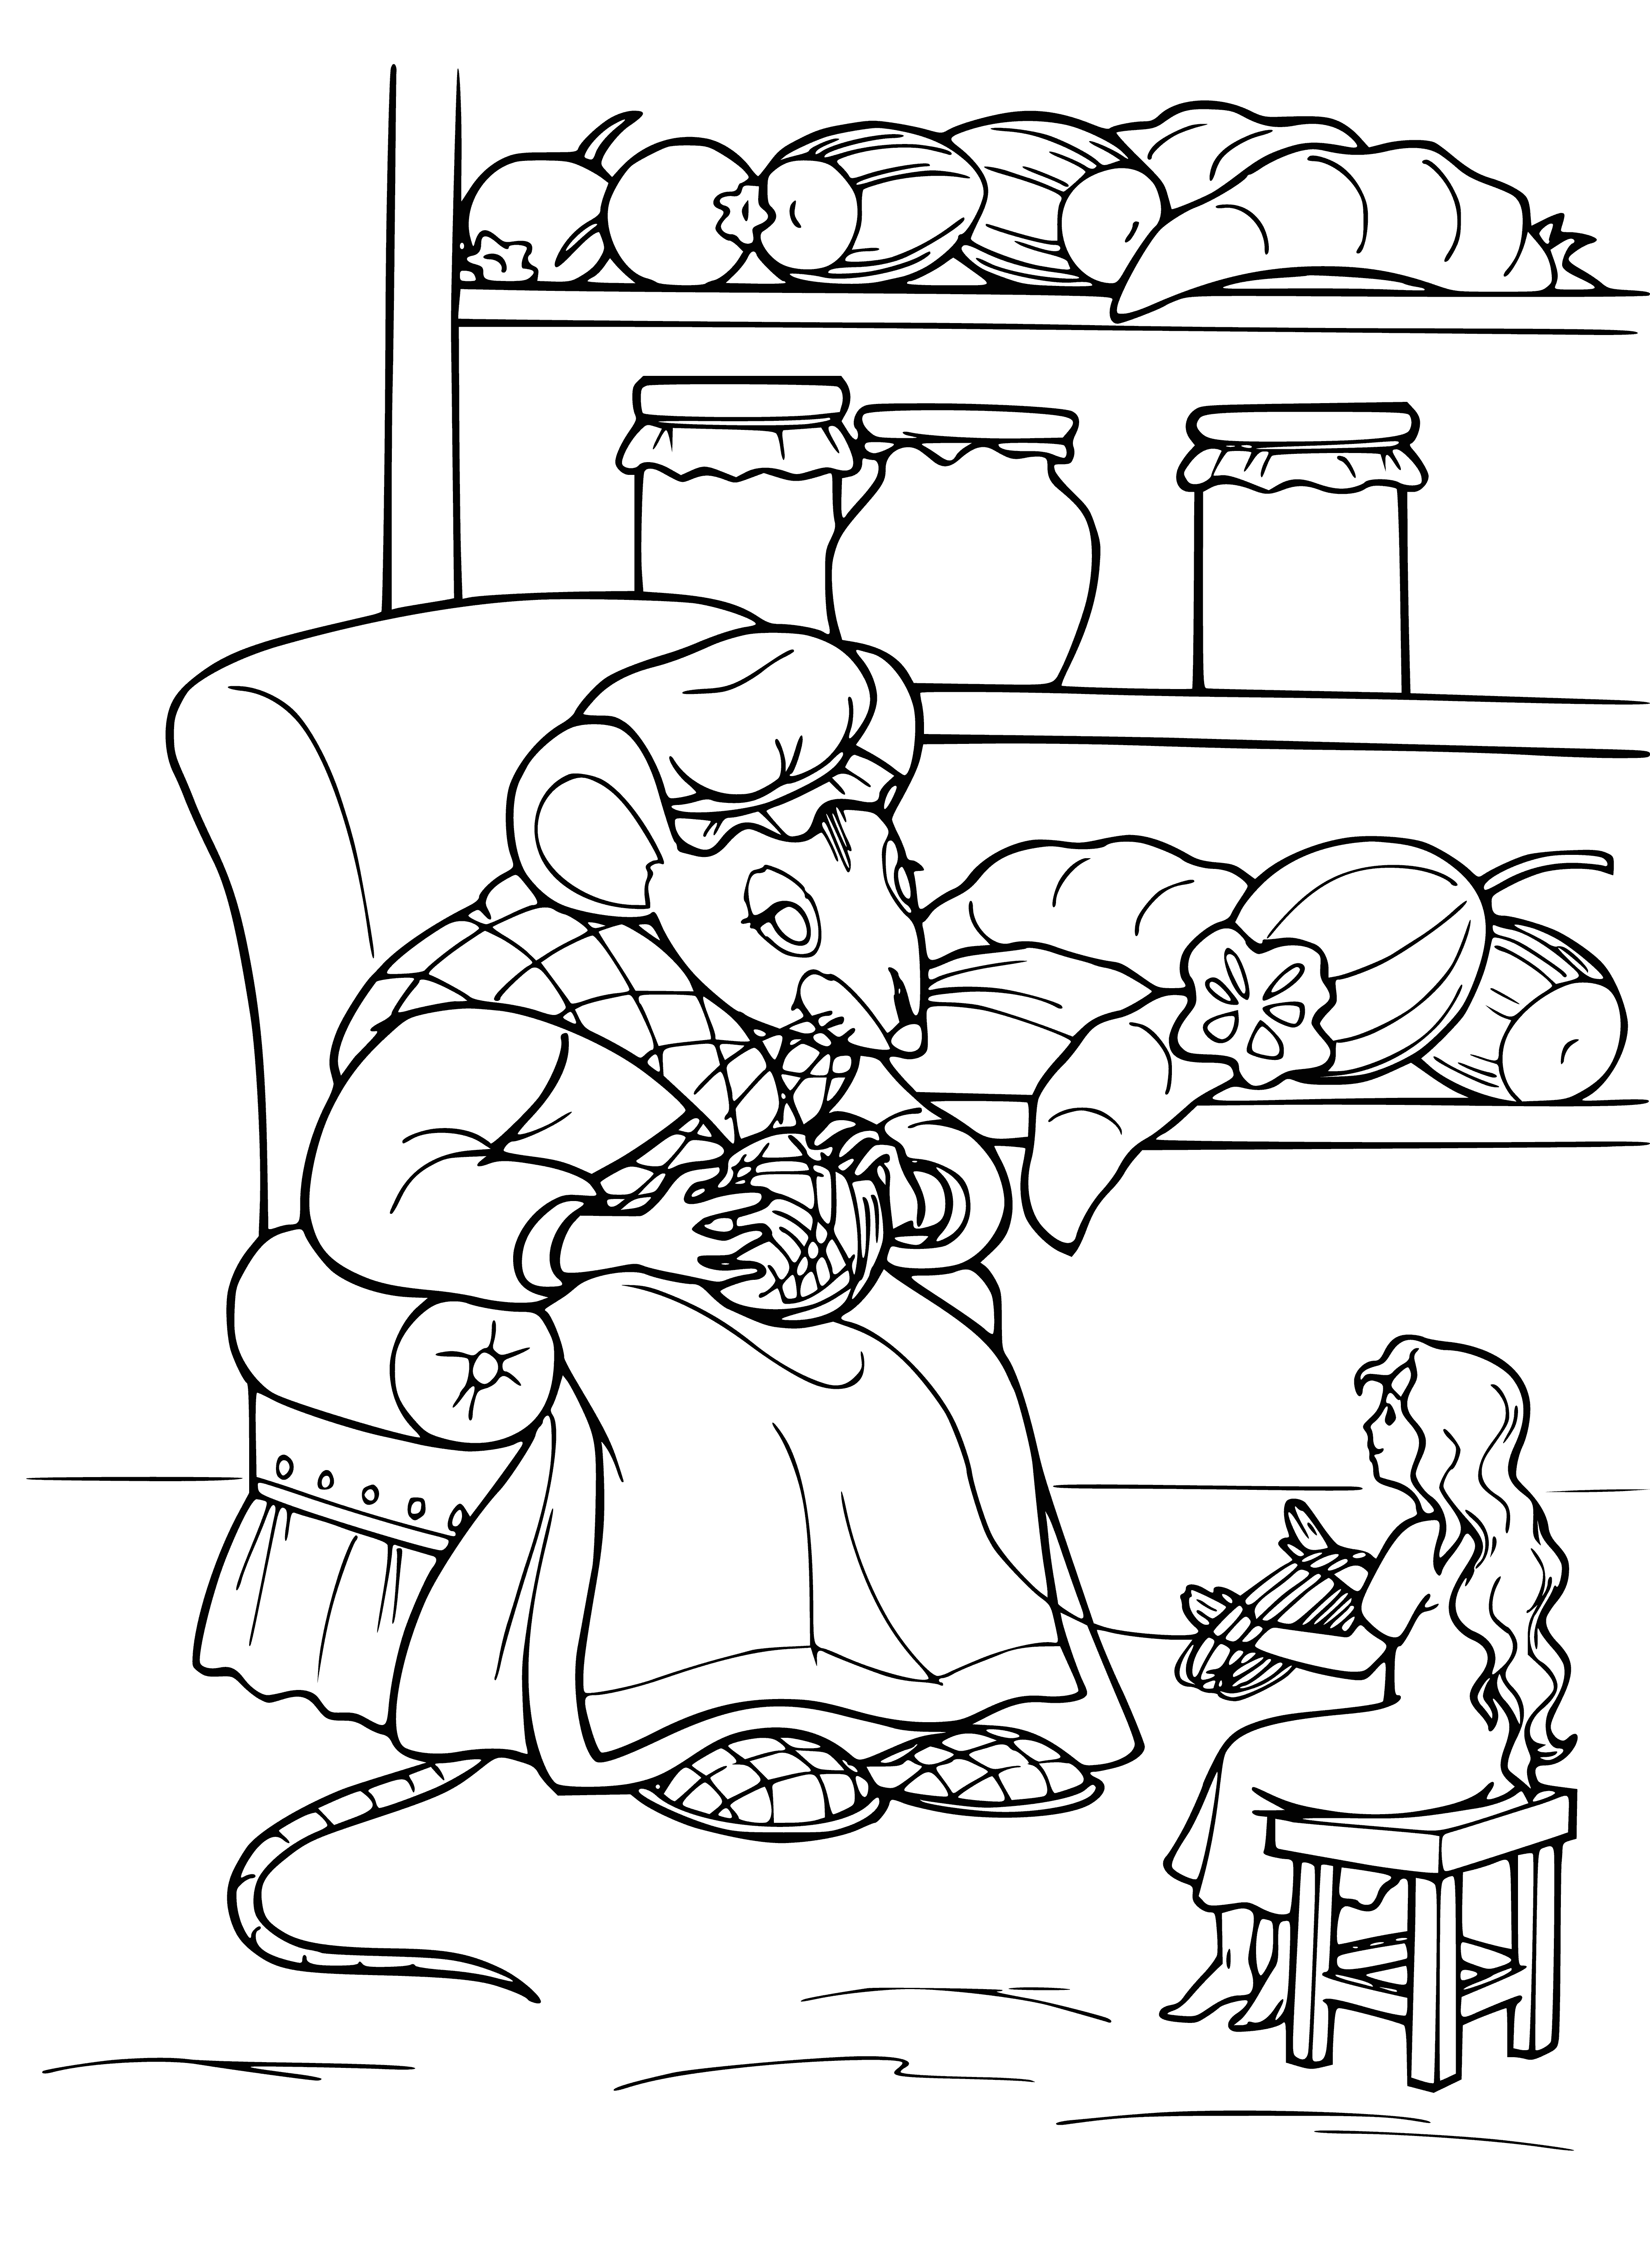 coloring page: Thumbelina looks down on the field mouse, who looks up at her from the field. #fairytale